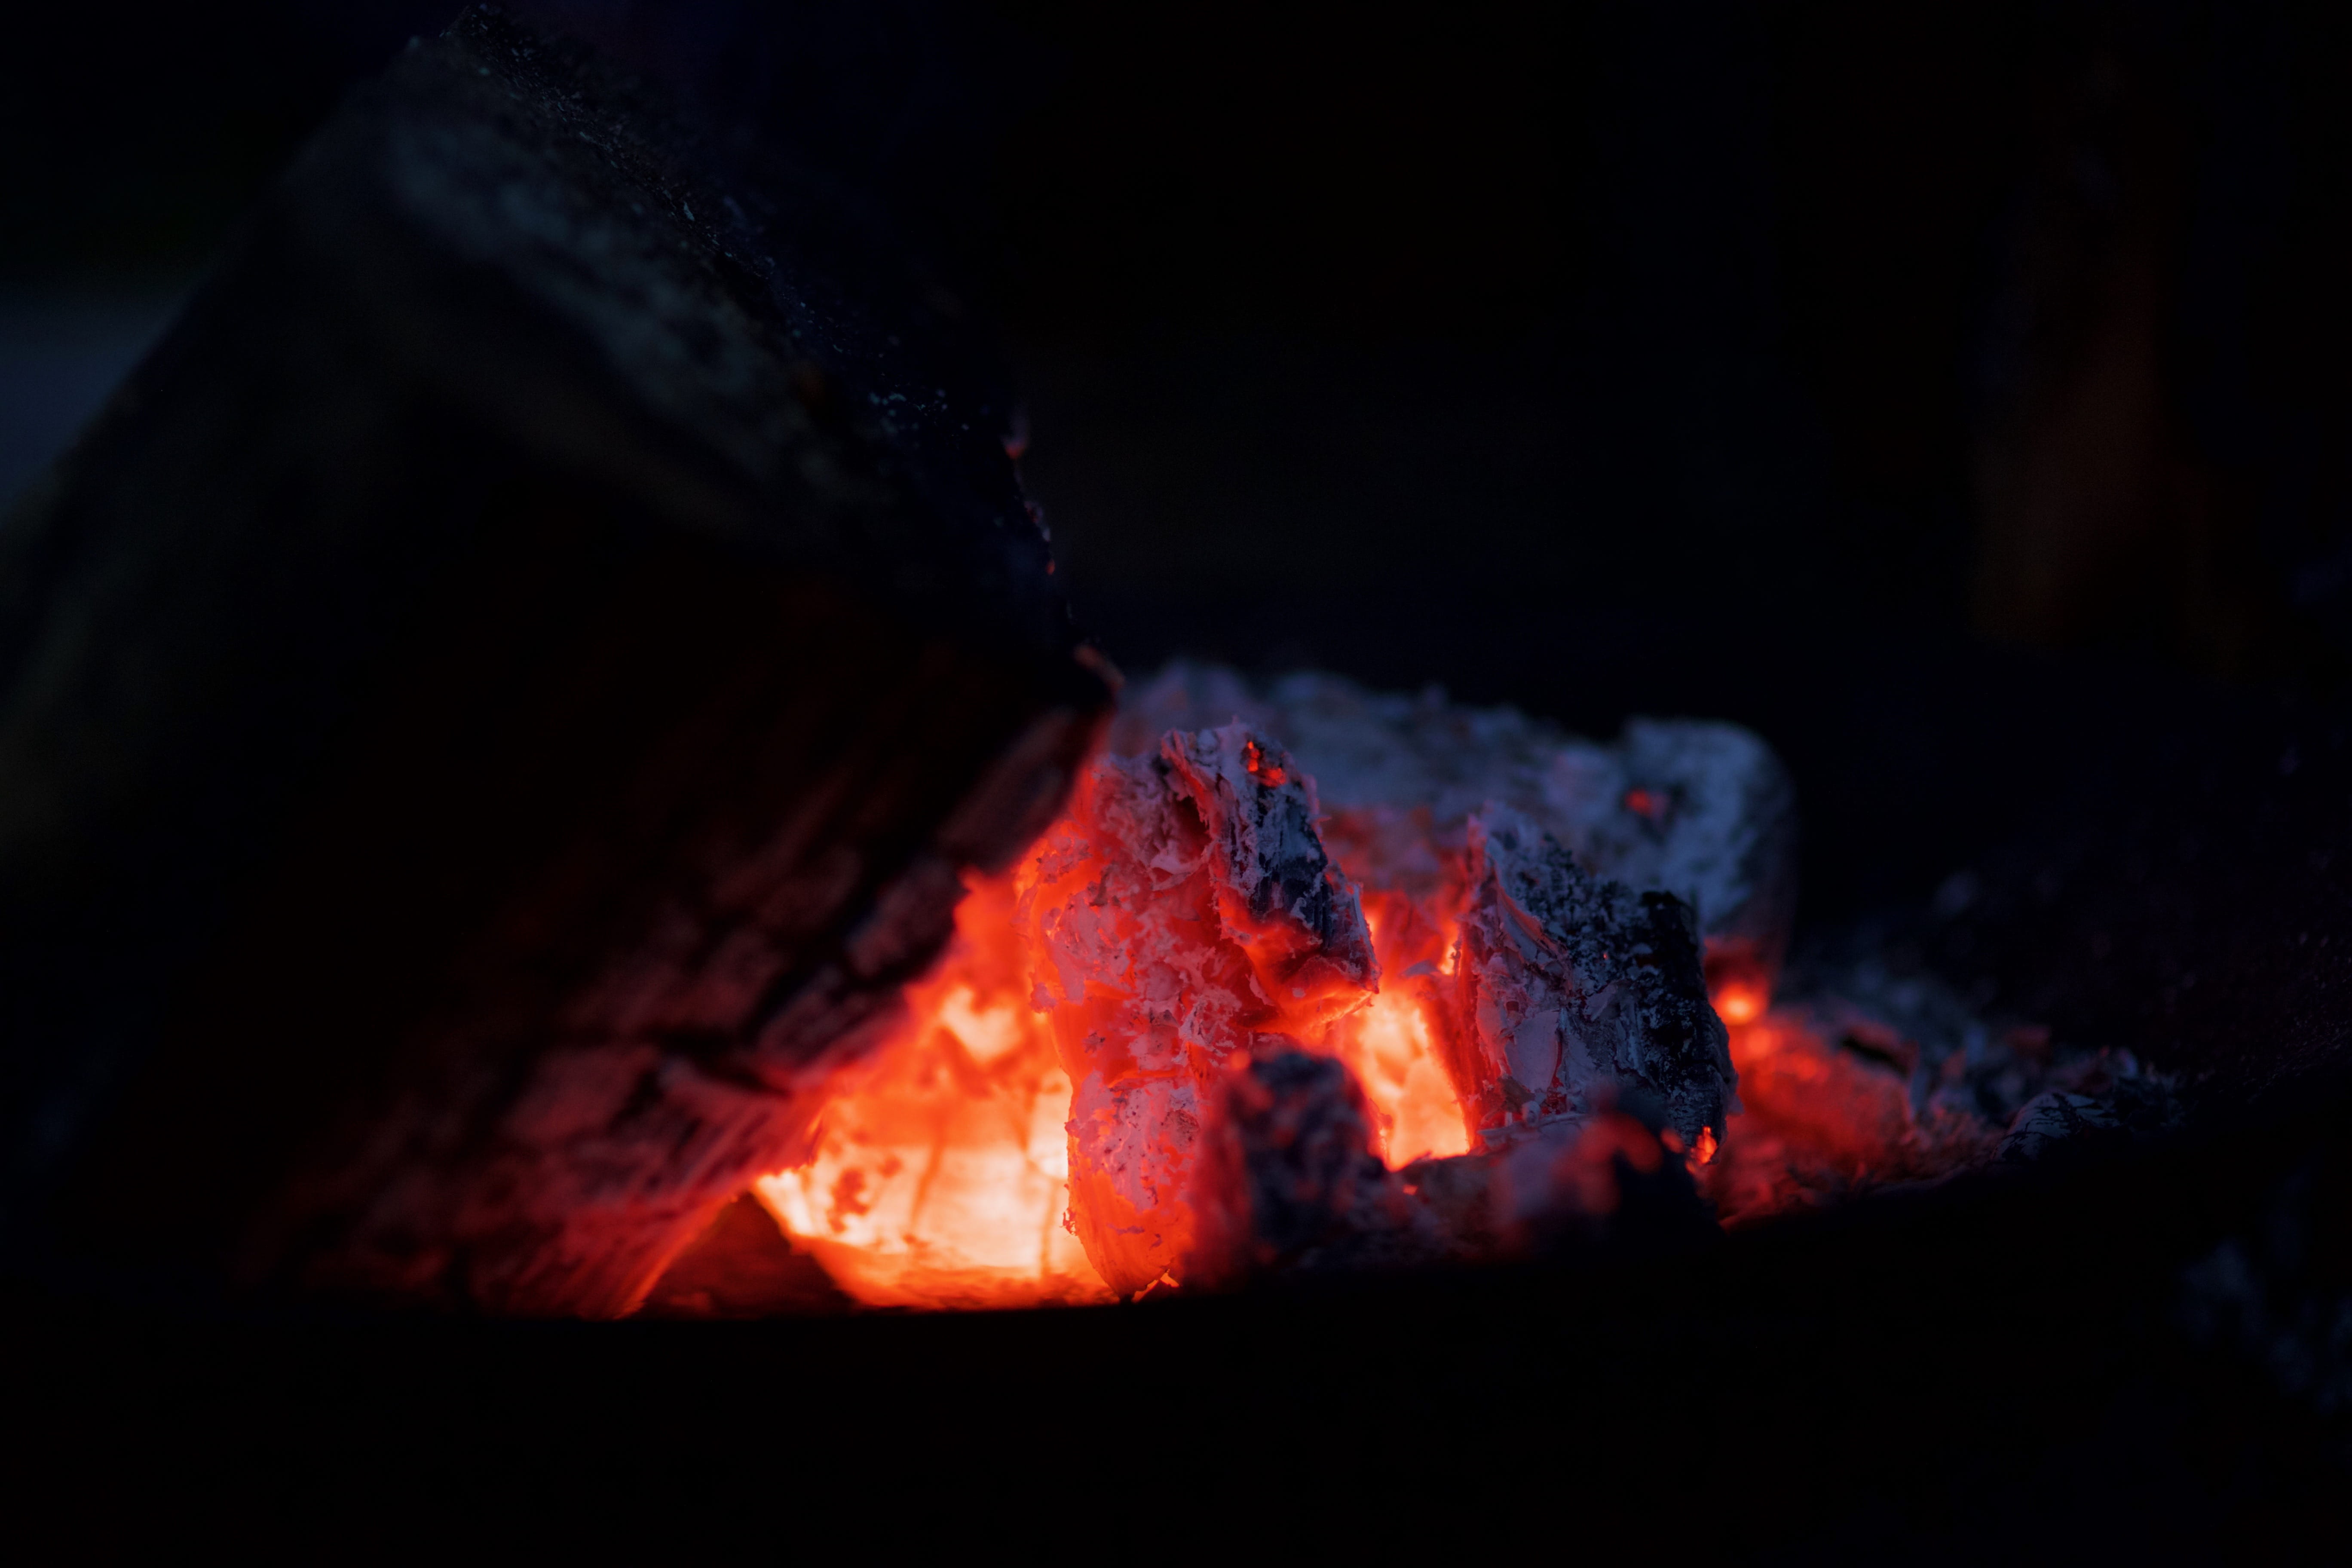 coal with ember, fire, flame, bonfire, manchester, united kingdom